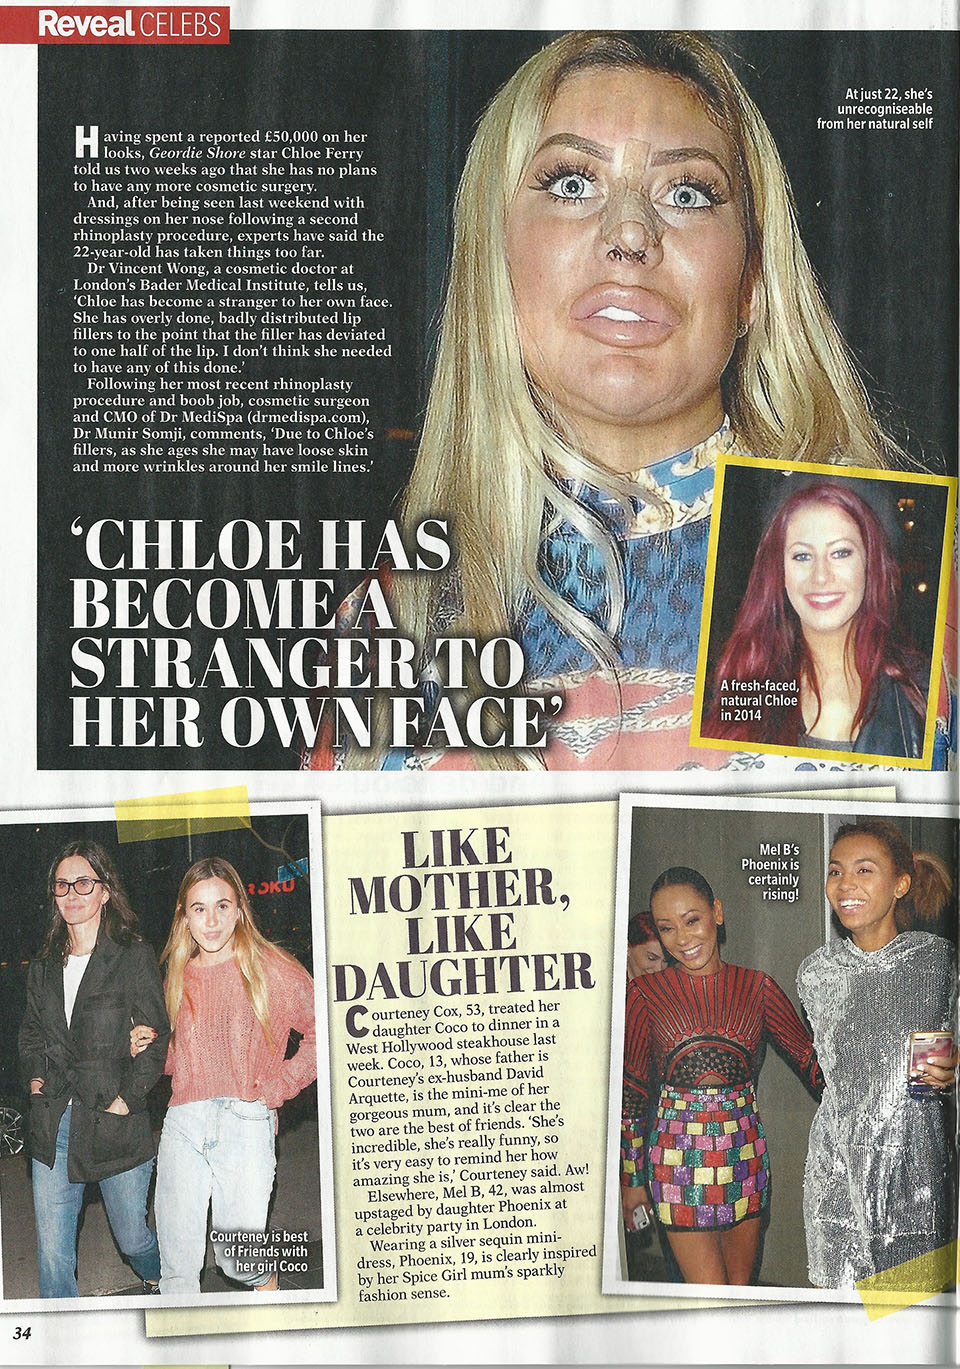 Dr Somji comments on Chloe's face in REVEAL Celebs